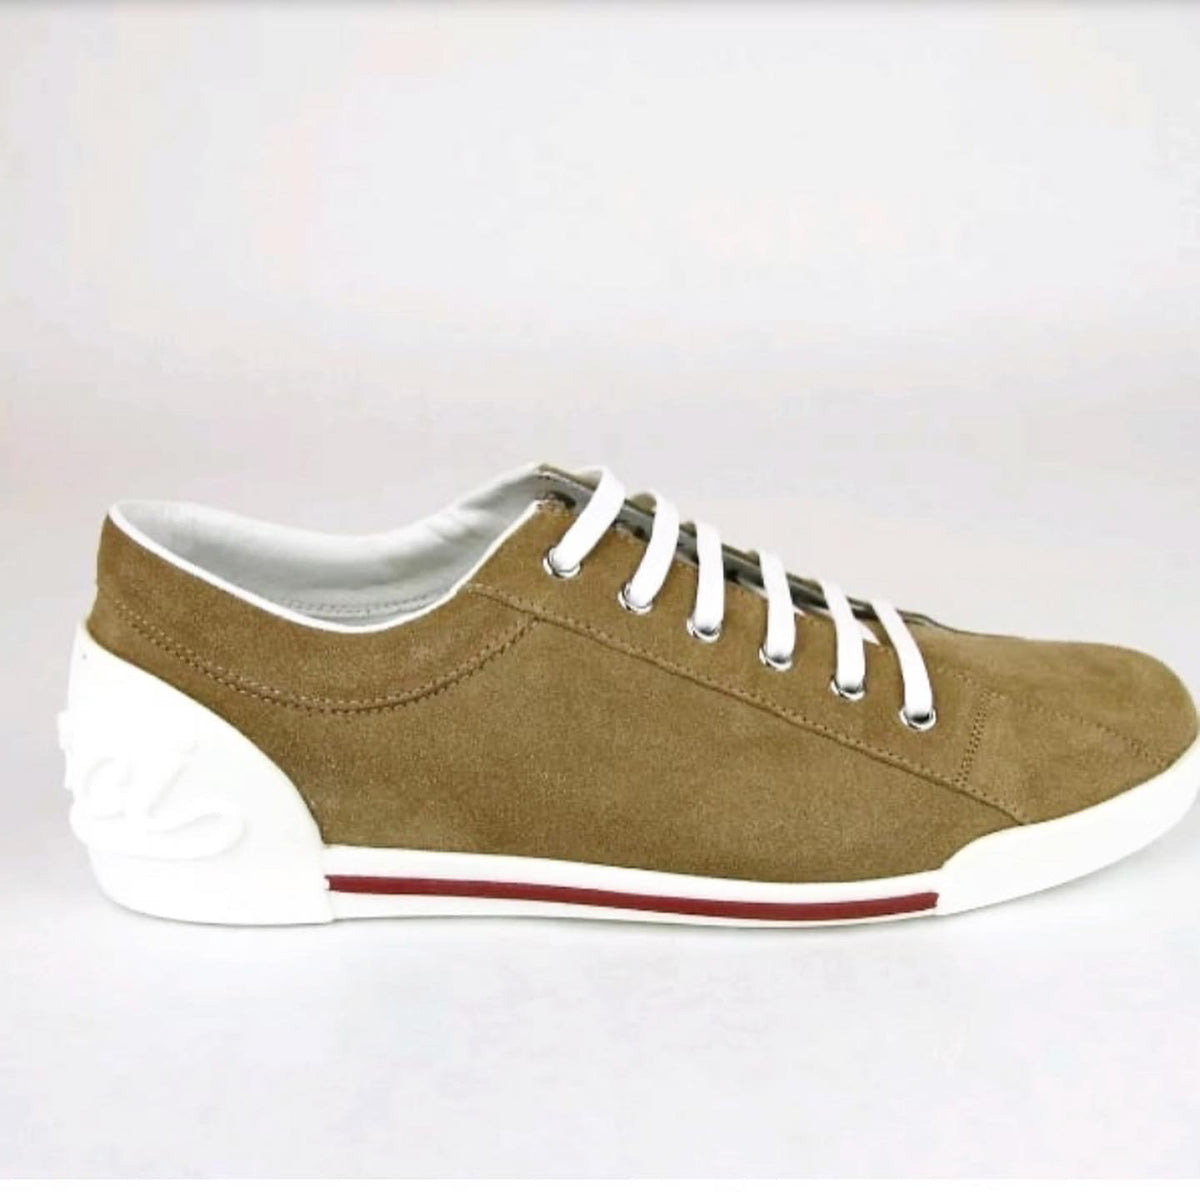 Gucci Women’s Suede Sneakers